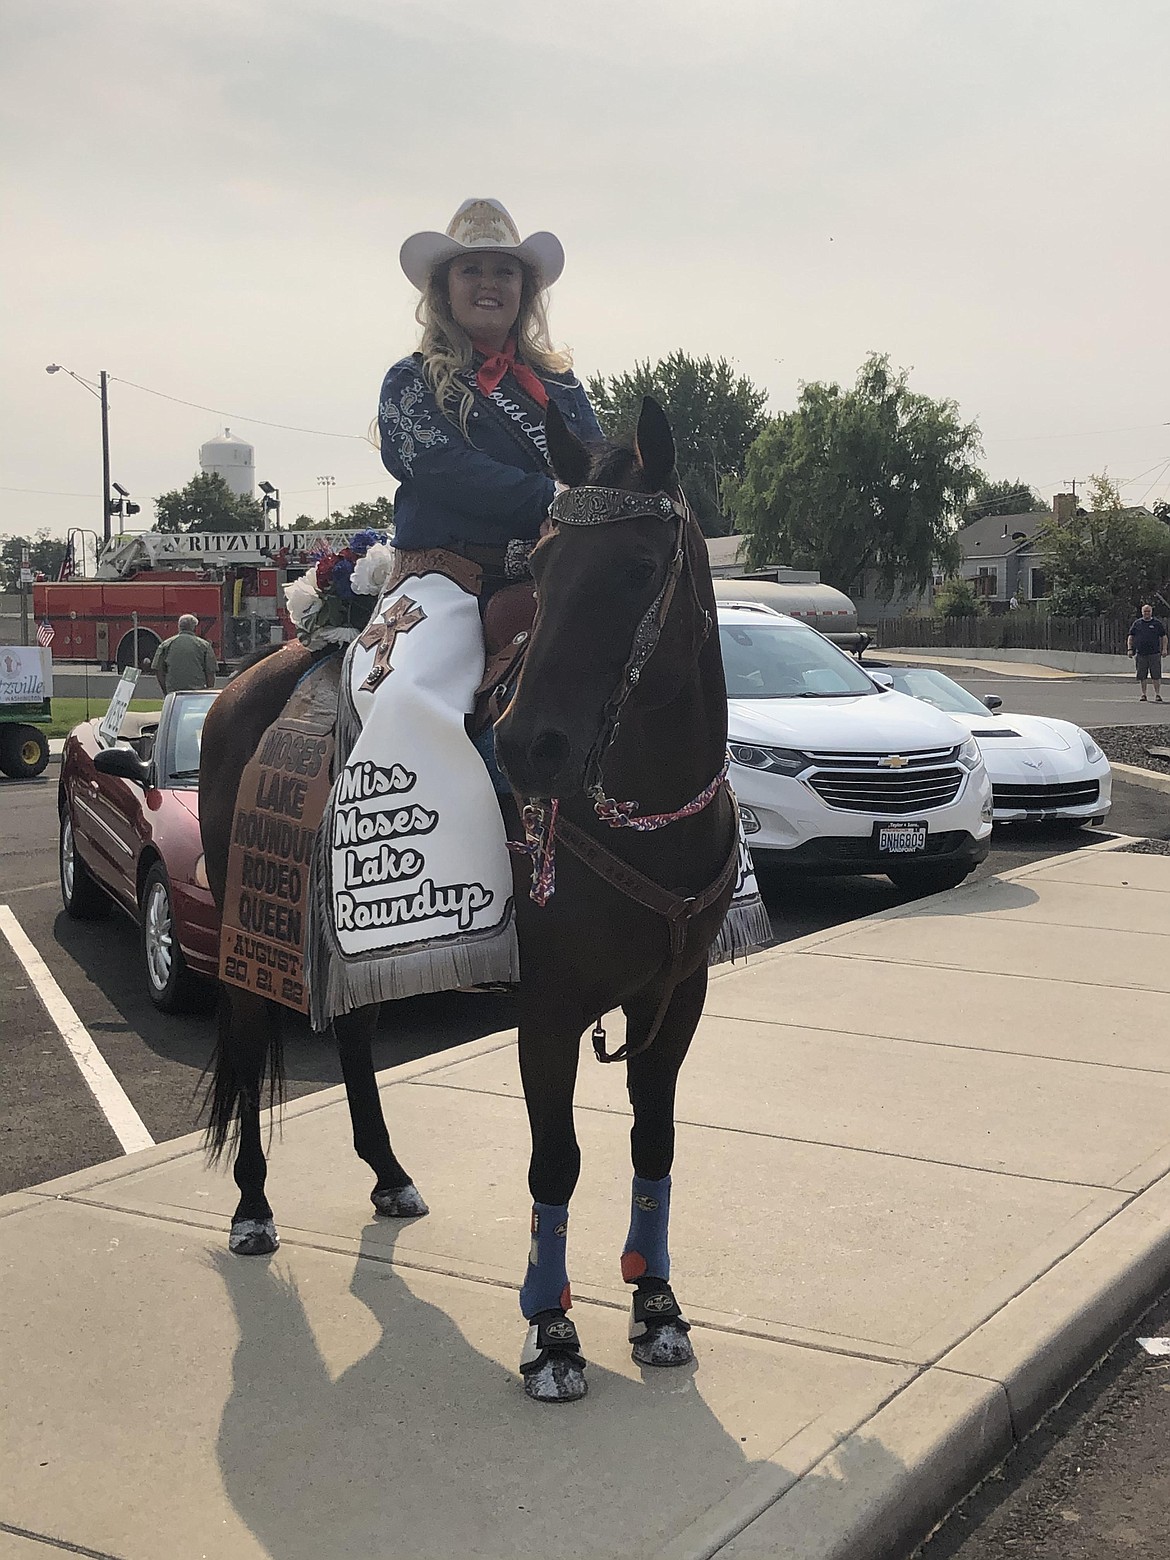 Courtesy photo

Moses Lake Roundup Queen Mykiah Hollenbeck pauses for photo before riding in an event. Despite the lack of activities in 2020 due to the coronavirus, rodeo participants are making the best of it, she said.